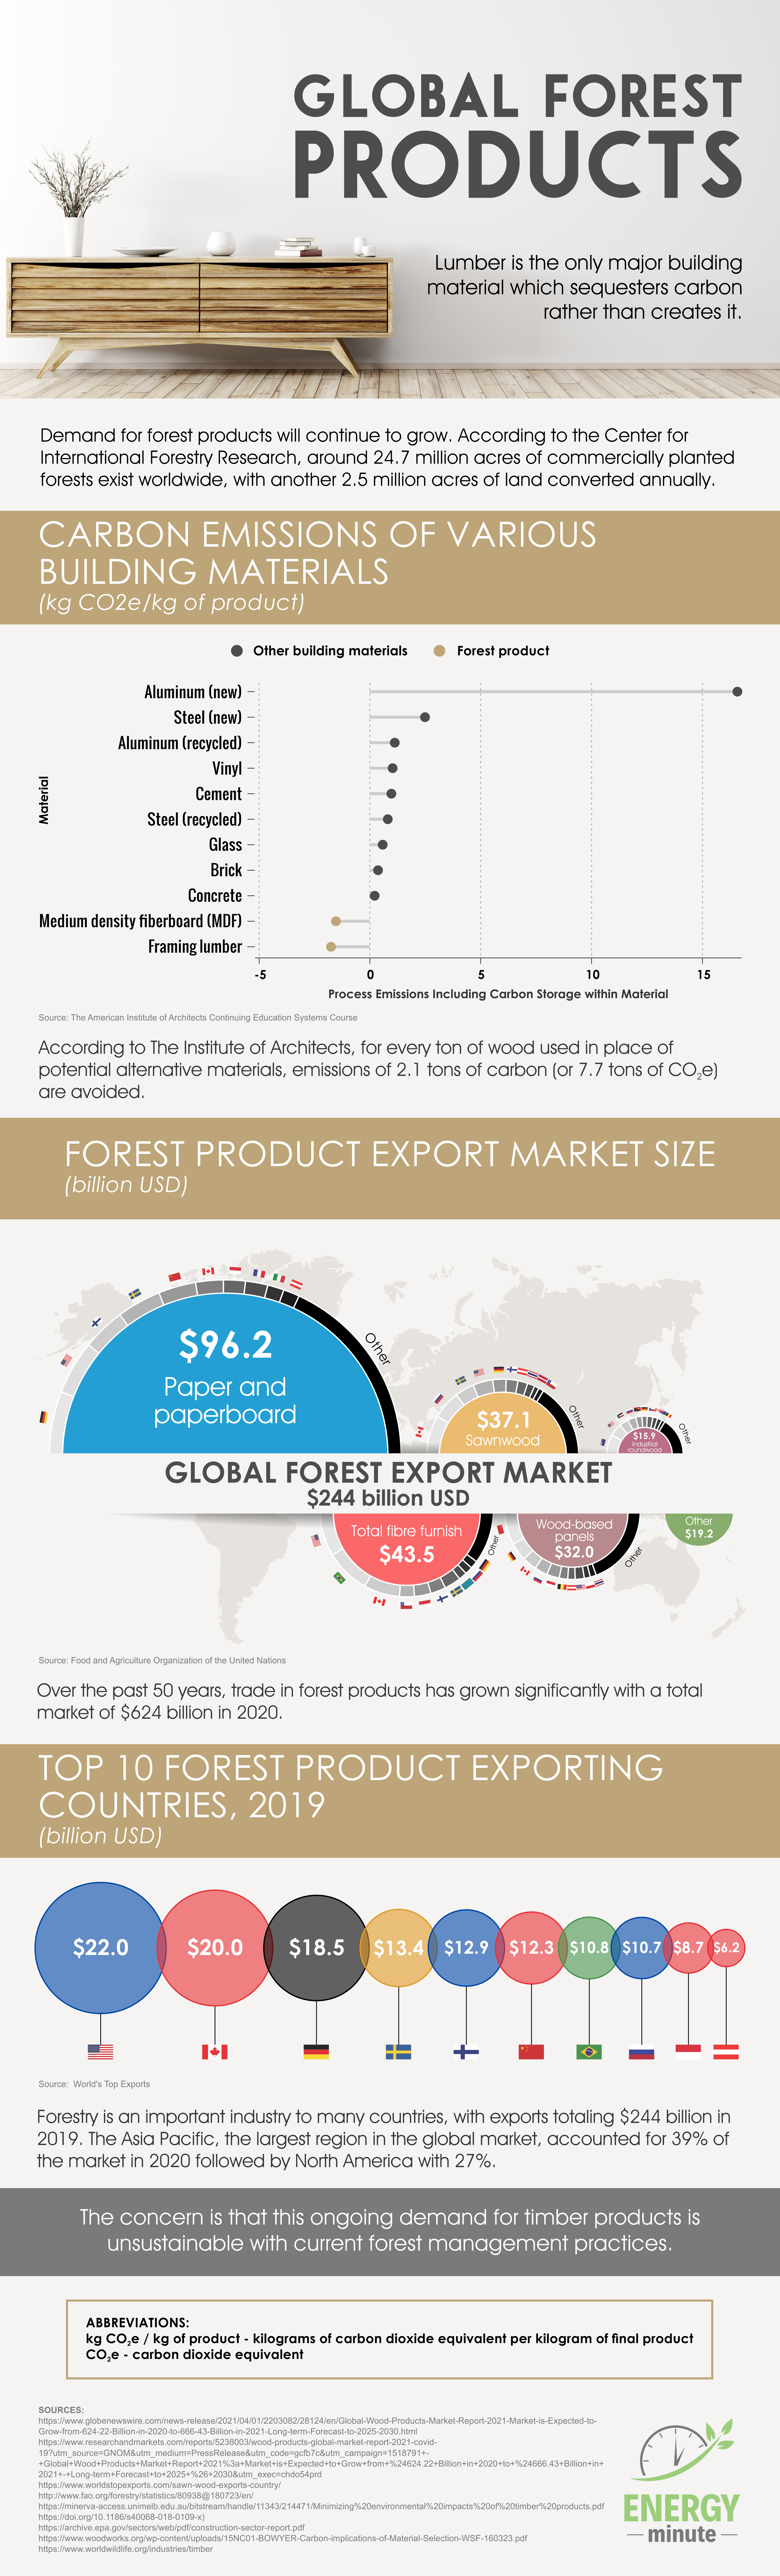 Forest Products: The Only Major Building Material that Sequesters Carbon